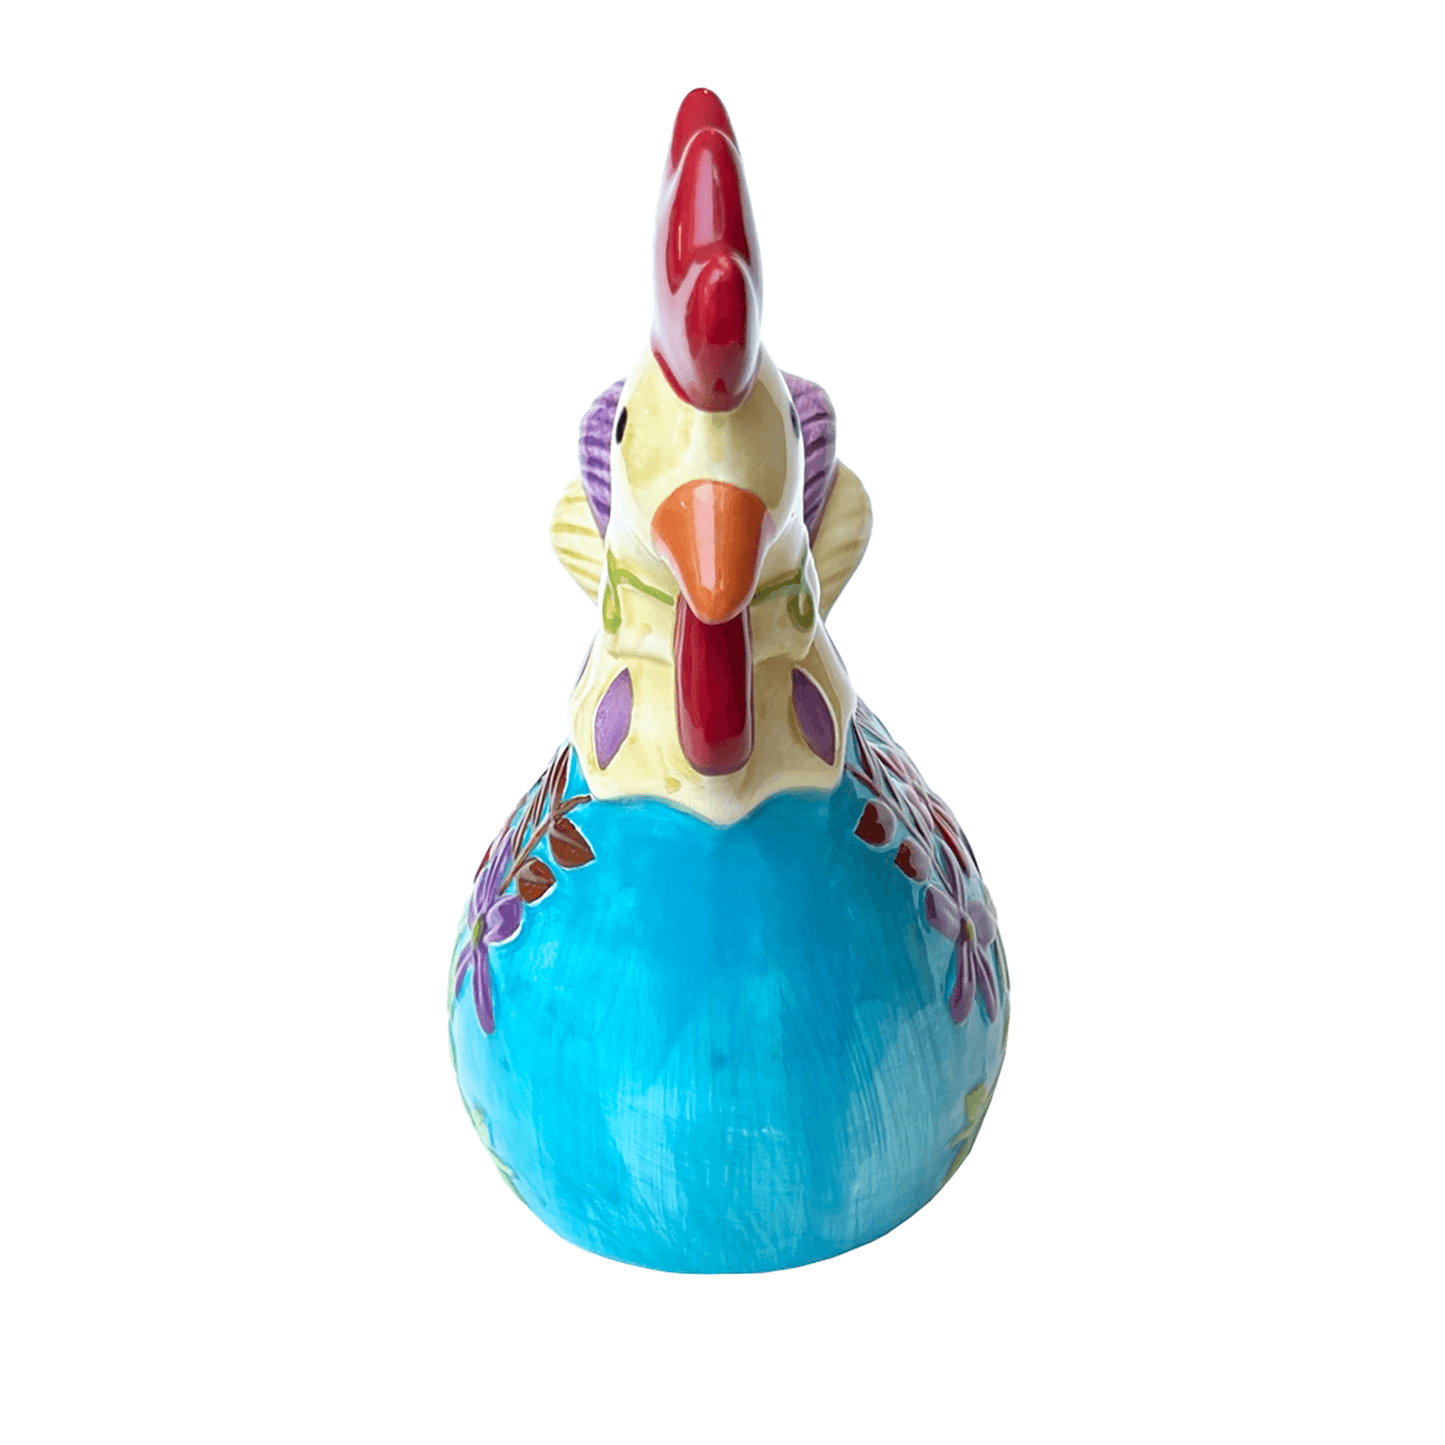 Apropos-Home-Collection-Blue-Ceramic-Chicken_-Turkey_front-view, kitchen-decor